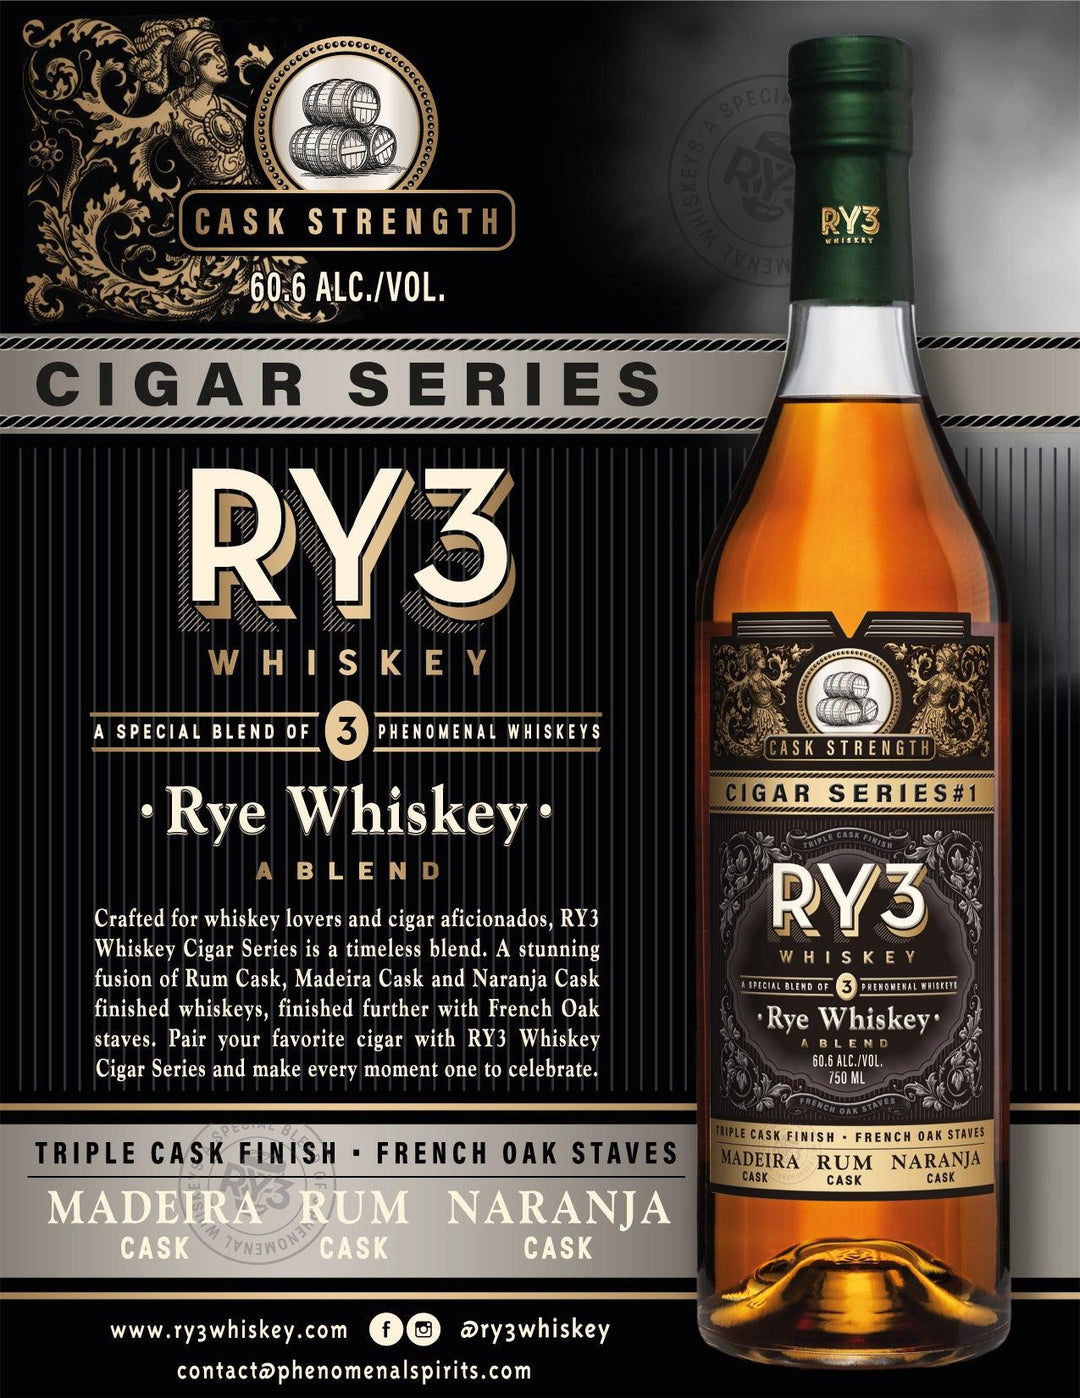 Discover the Exquisite Harmony of Ry3 Whiskey Cigar Series #1 Rye Whiskey